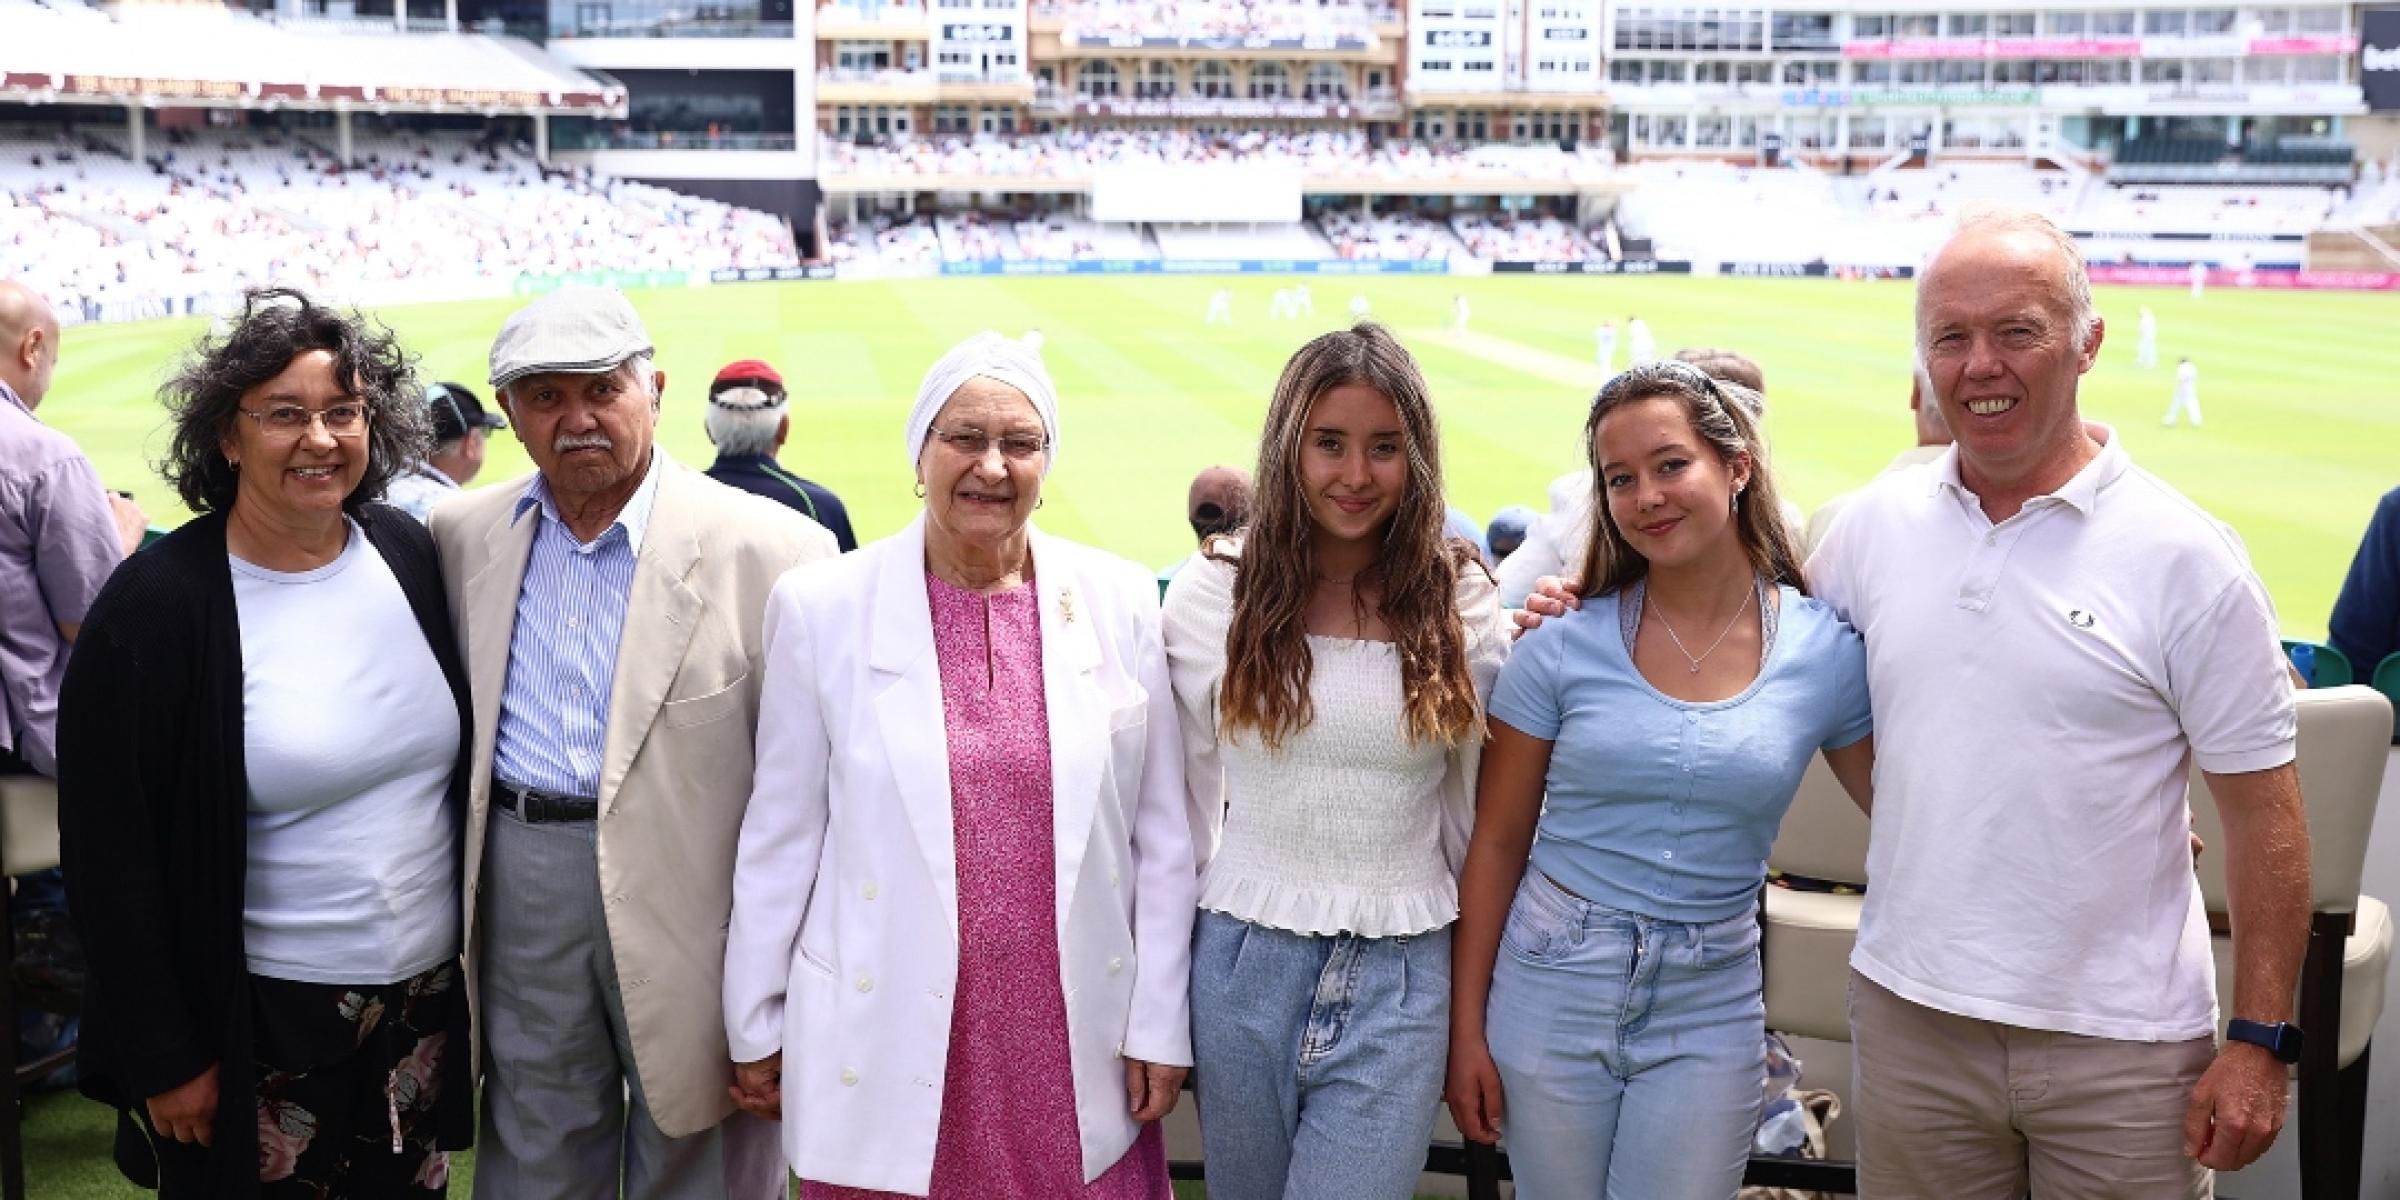 Zohra, Afzal and their family at  the Dementia Friendly Match between the Surrey and Kent cricket teams at the Oval